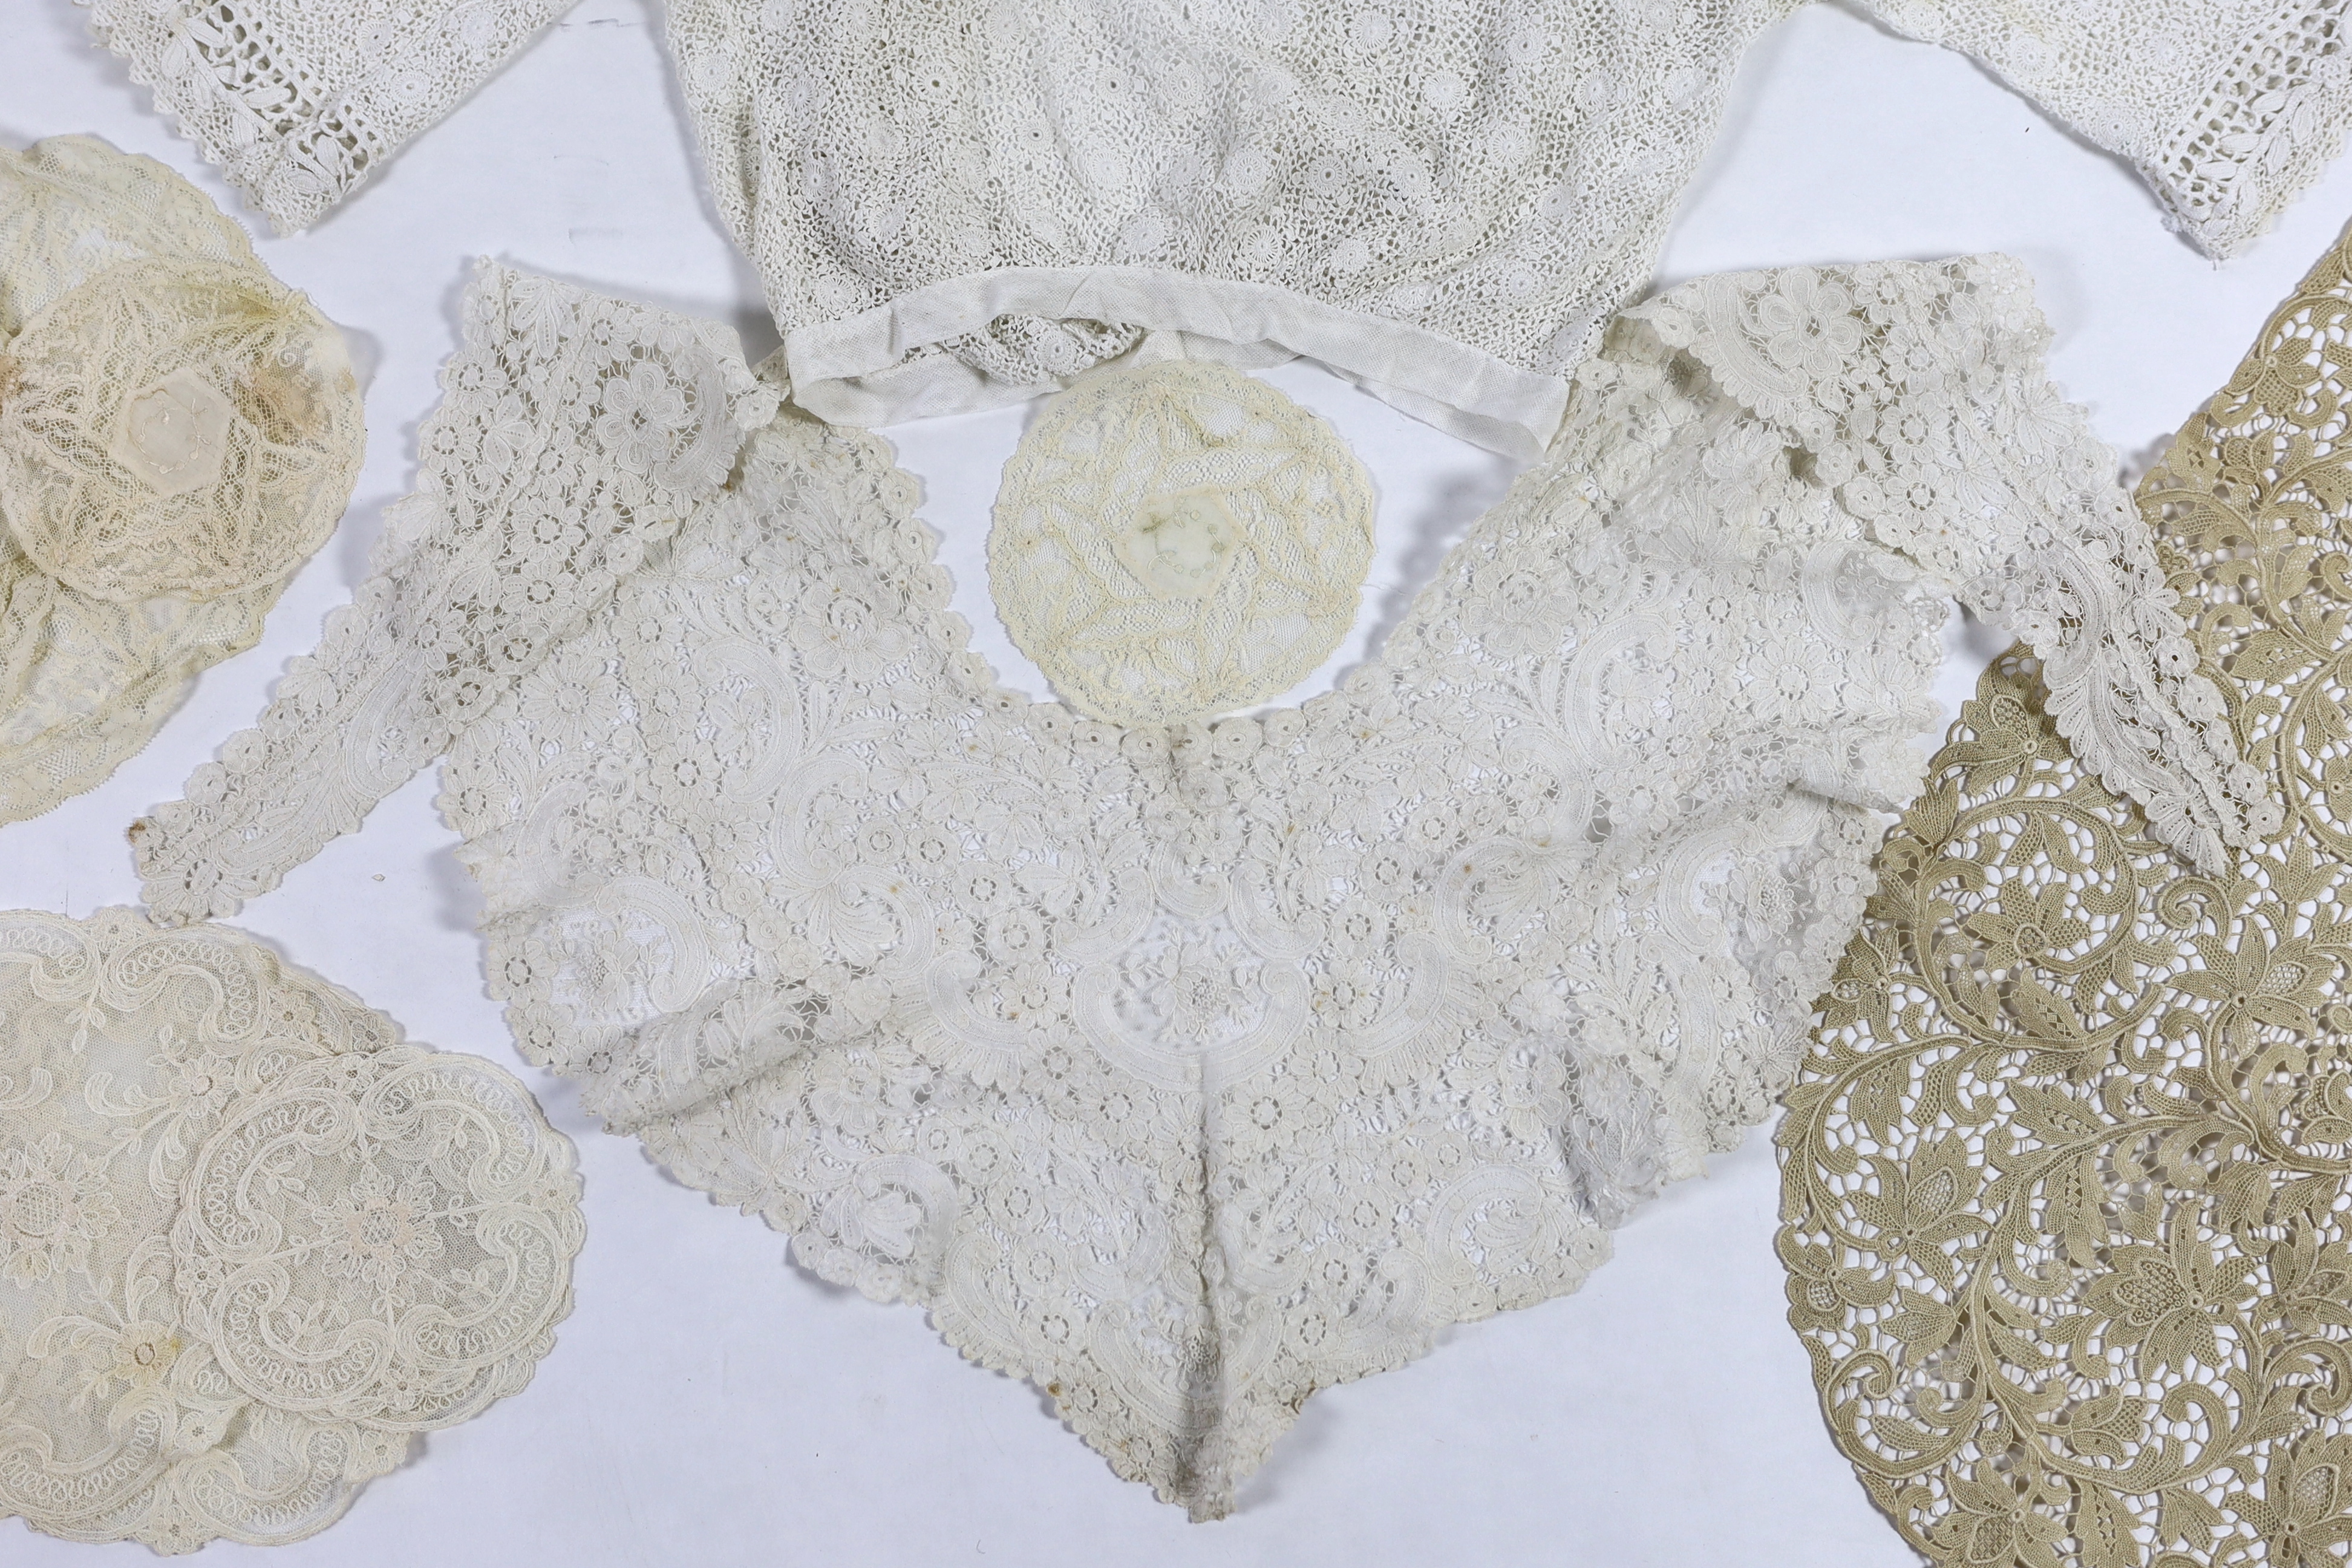 An Edwardian handmade Irish crocheted ladies blouse (small size), a Brussels hand bobbin lace Bertha with Point de Gaze insertions, two large and one small Normandy lace mats, four large and two smaller similar needle la